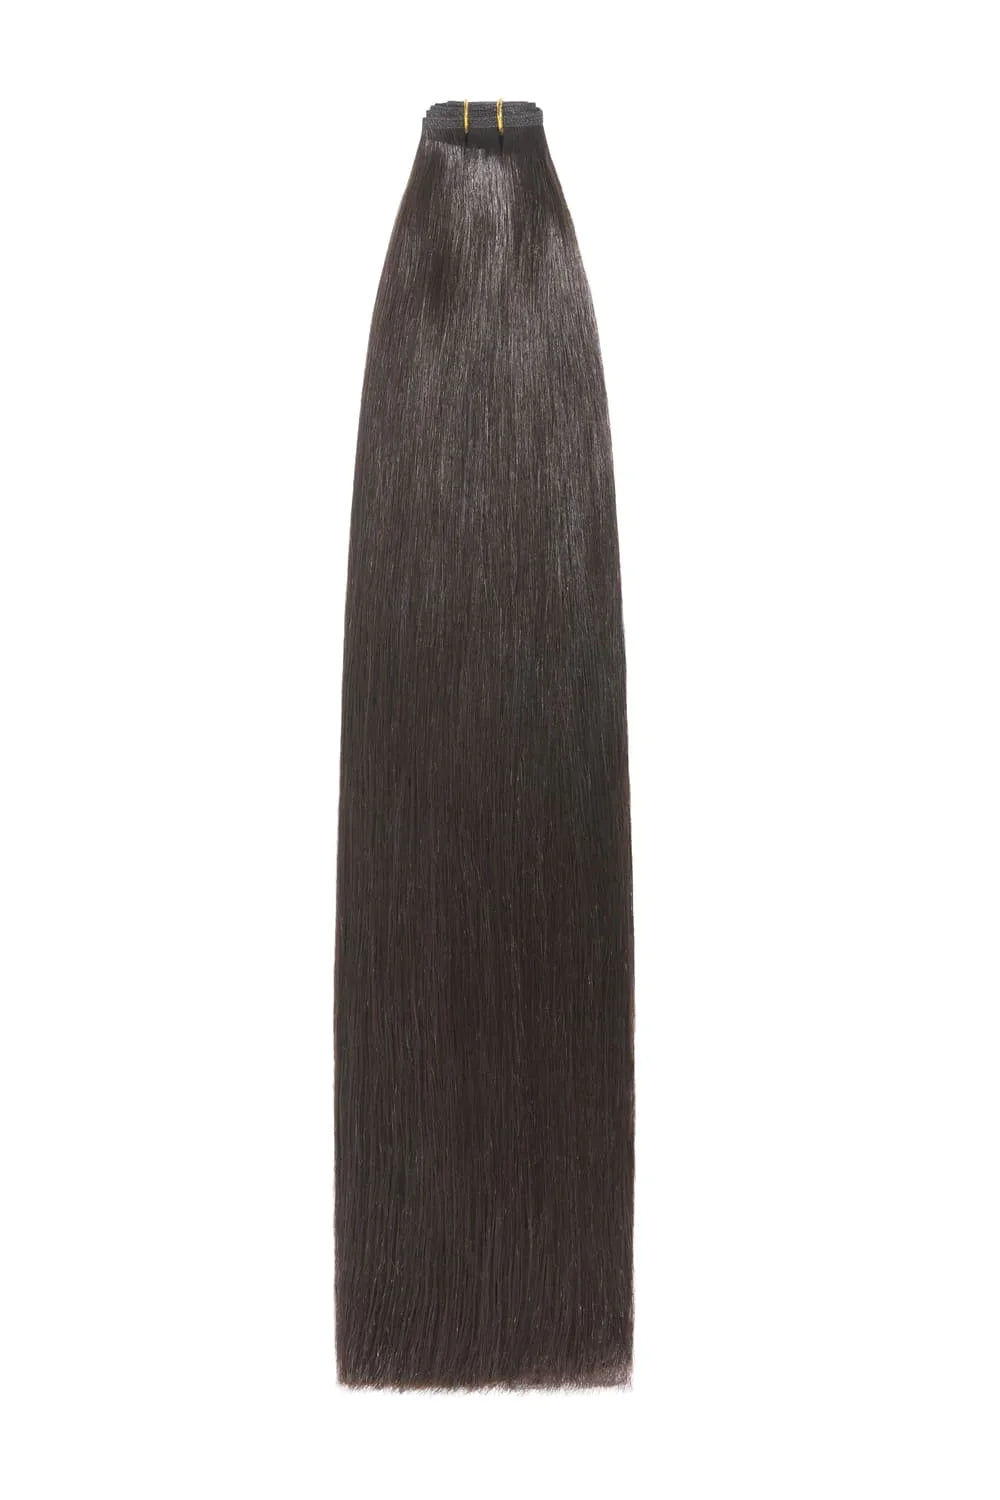 Darkest Brown (#2) Remy Royale Flat Weft Hair Extensions